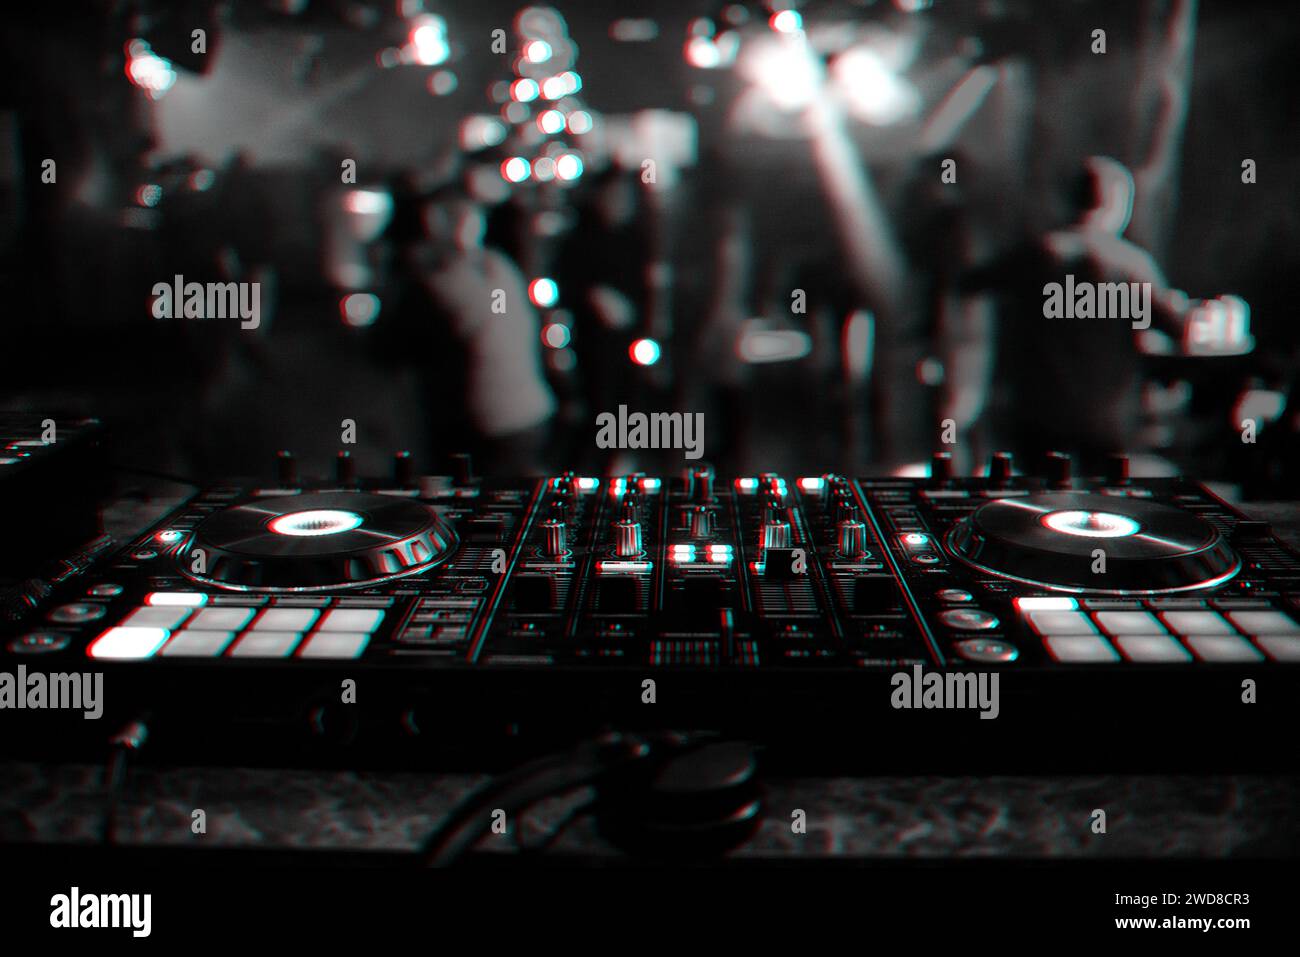 DJ mixer controller Board for mixing music in a nightclub at a party. Black and white photo with glitch effect and small grain Stock Photo